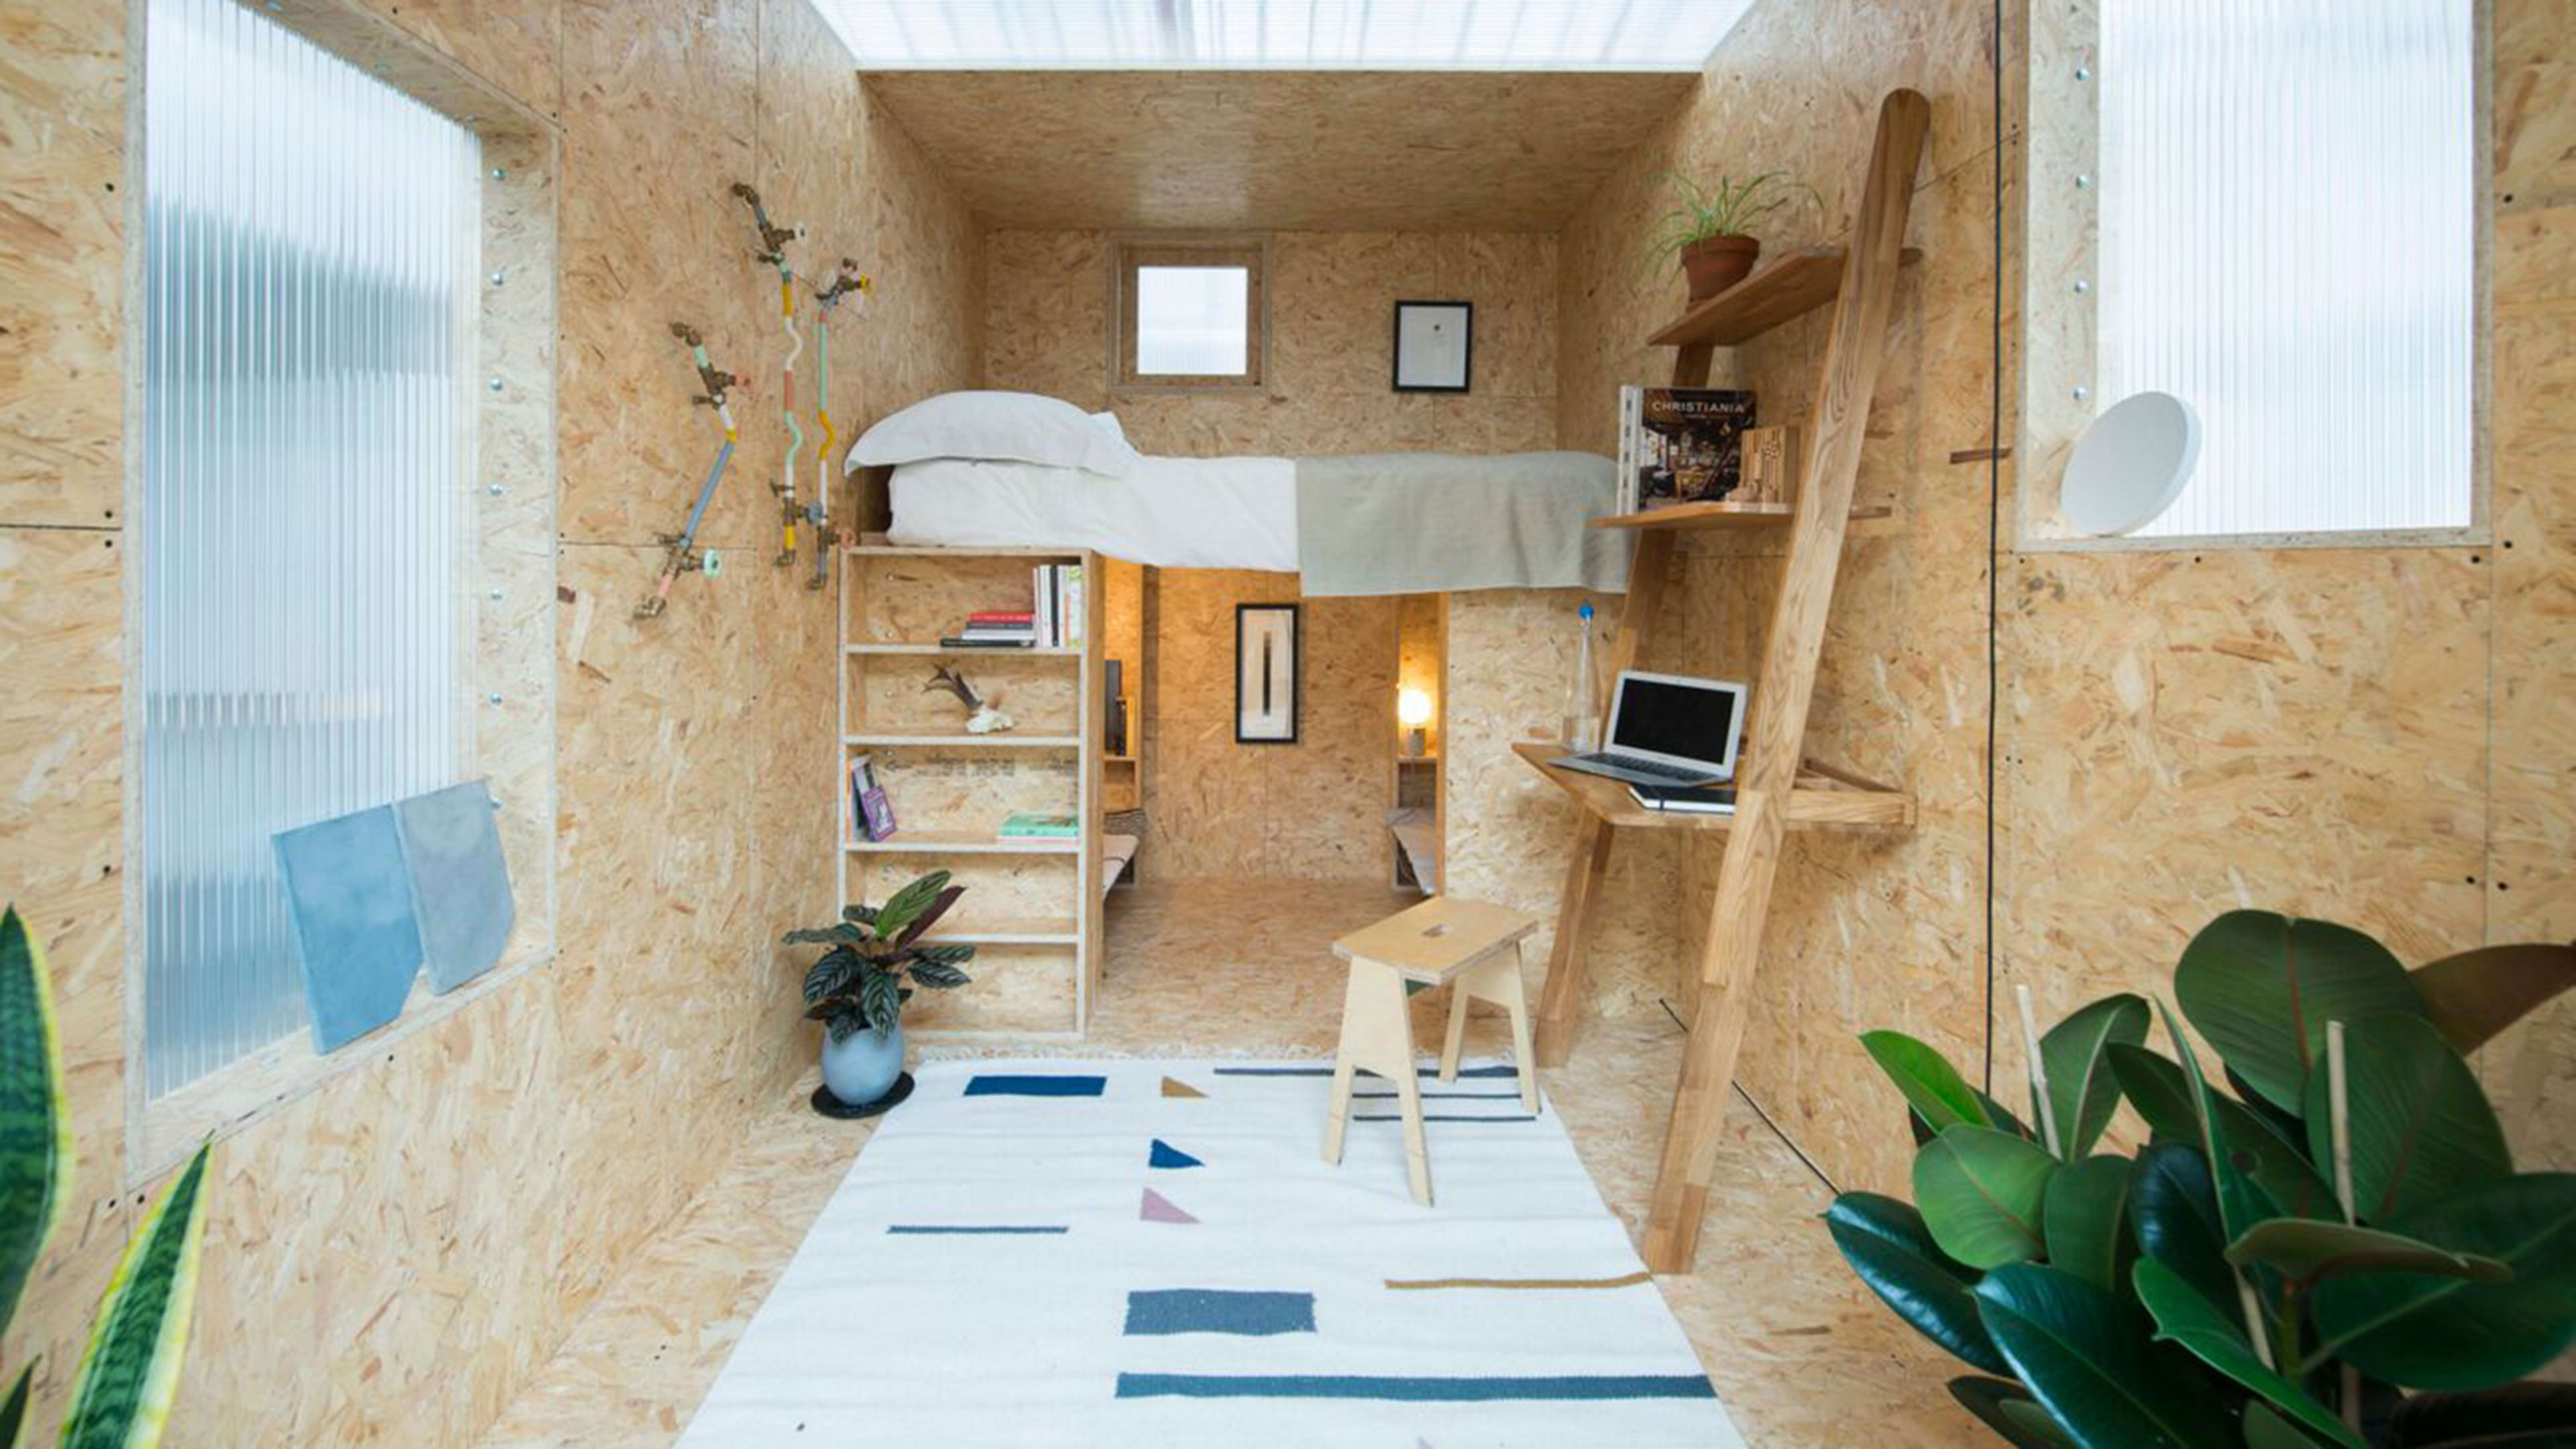 This Startup Builds Cheap Pop-Up Housing Inside Vacant Buildings